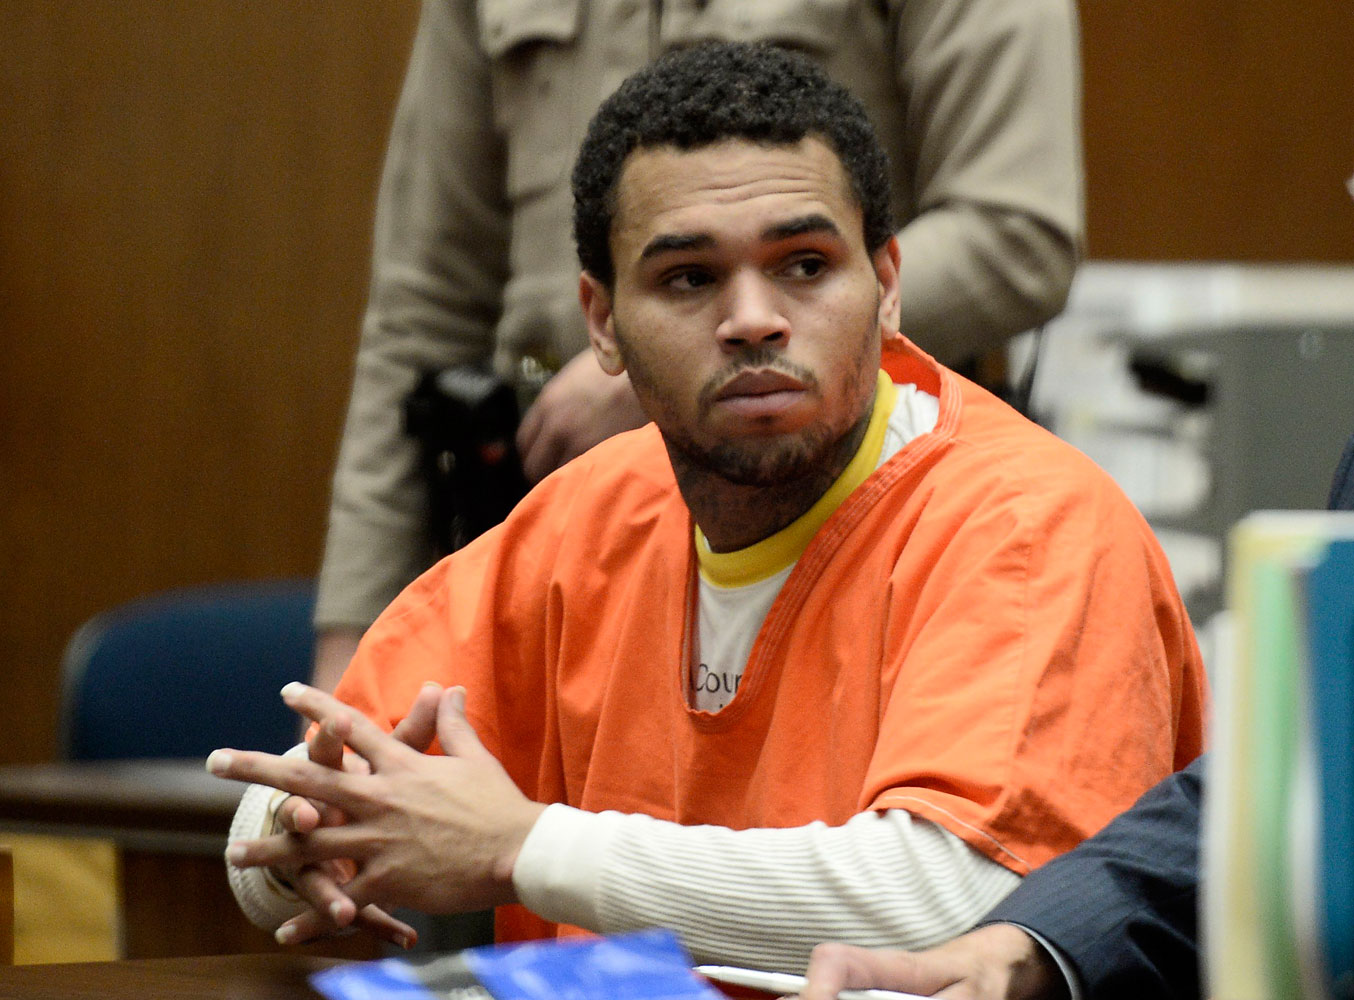 Chris Brown appears in court for a hearing at the Criminal Courts in Los Angeles